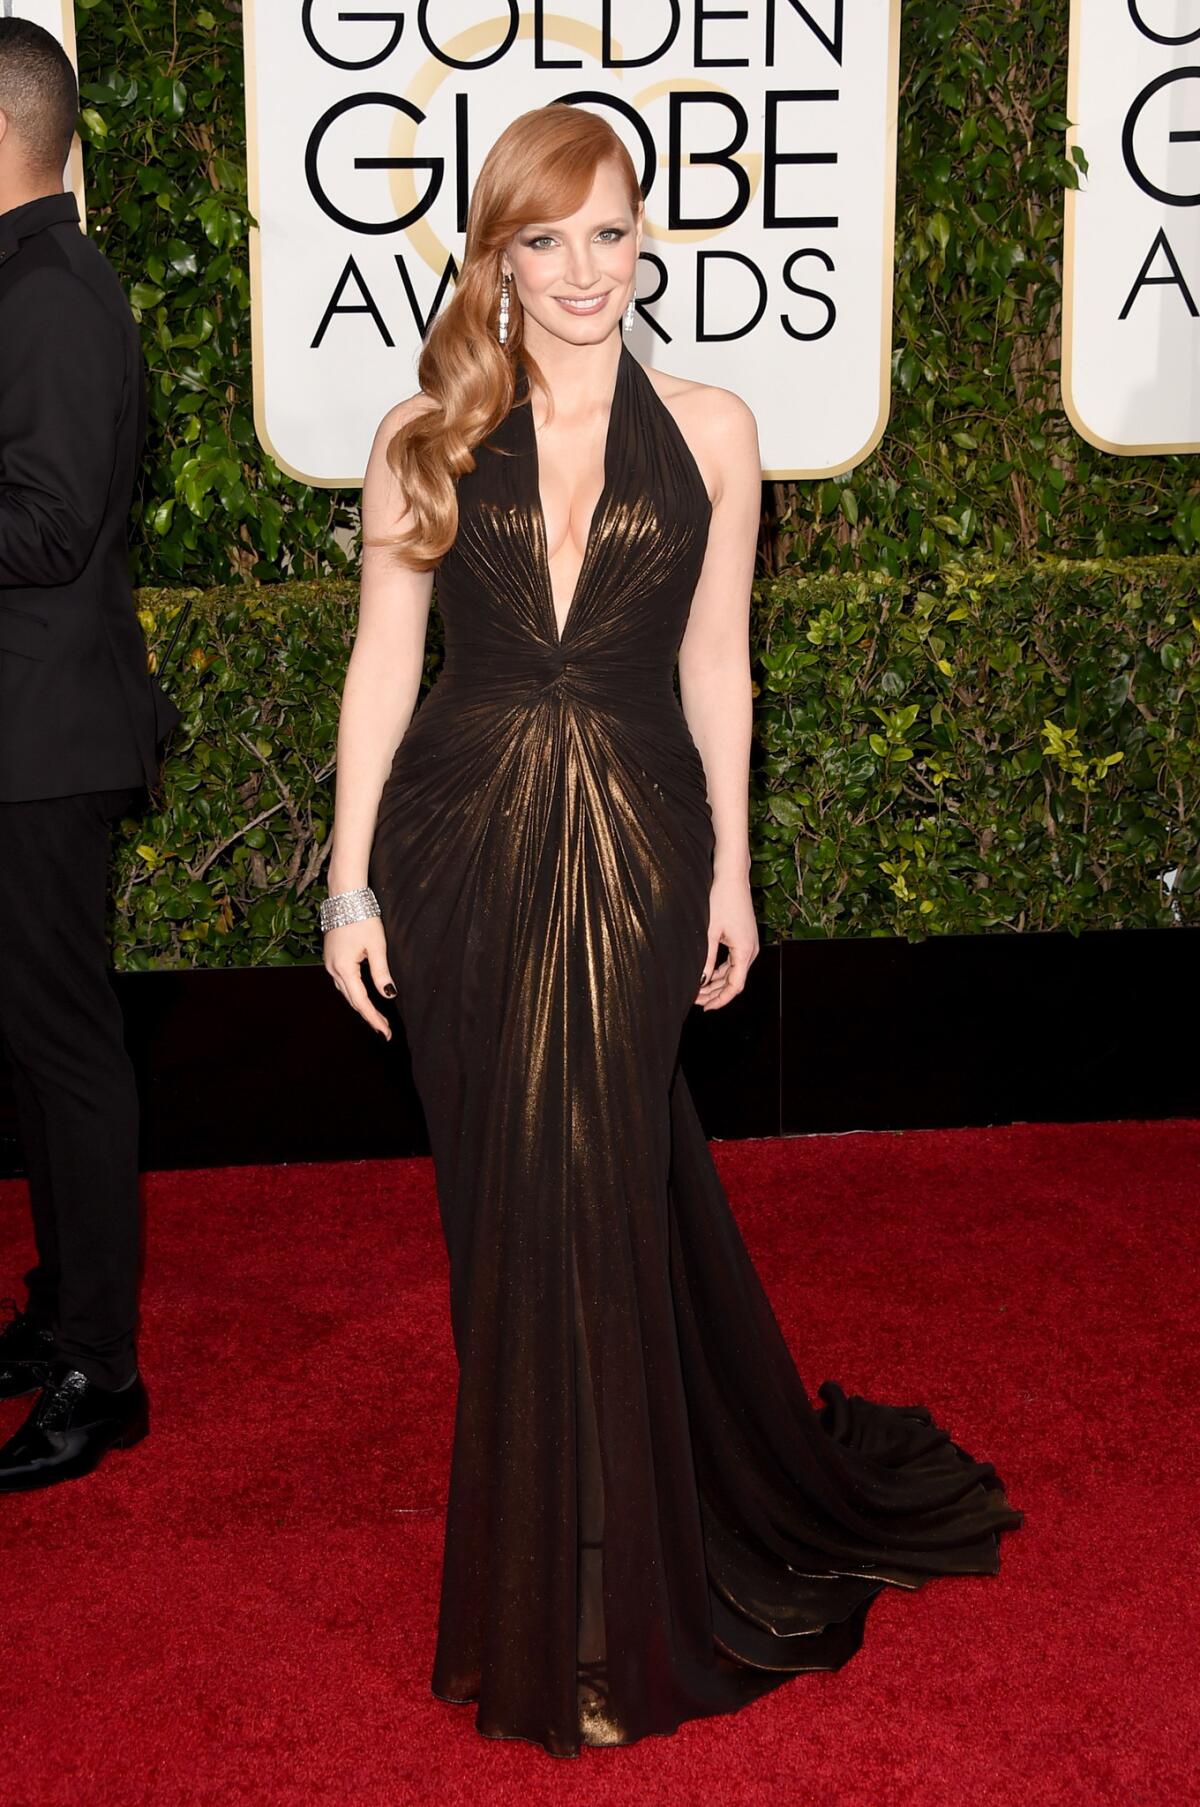 BEVERLY HILLS, CA - JANUARY 11: Actress Jessica Chastain attends the 72nd Annual Golden Globe Awards at The Beverly Hilton Hotel on January 11, 2015 in Beverly Hills, California. (Photo by Jason Merritt/Getty Images) ** OUTS - ELSENT, FPG - OUTS * NM, PH, VA if sourced by CT, LA or MoD **